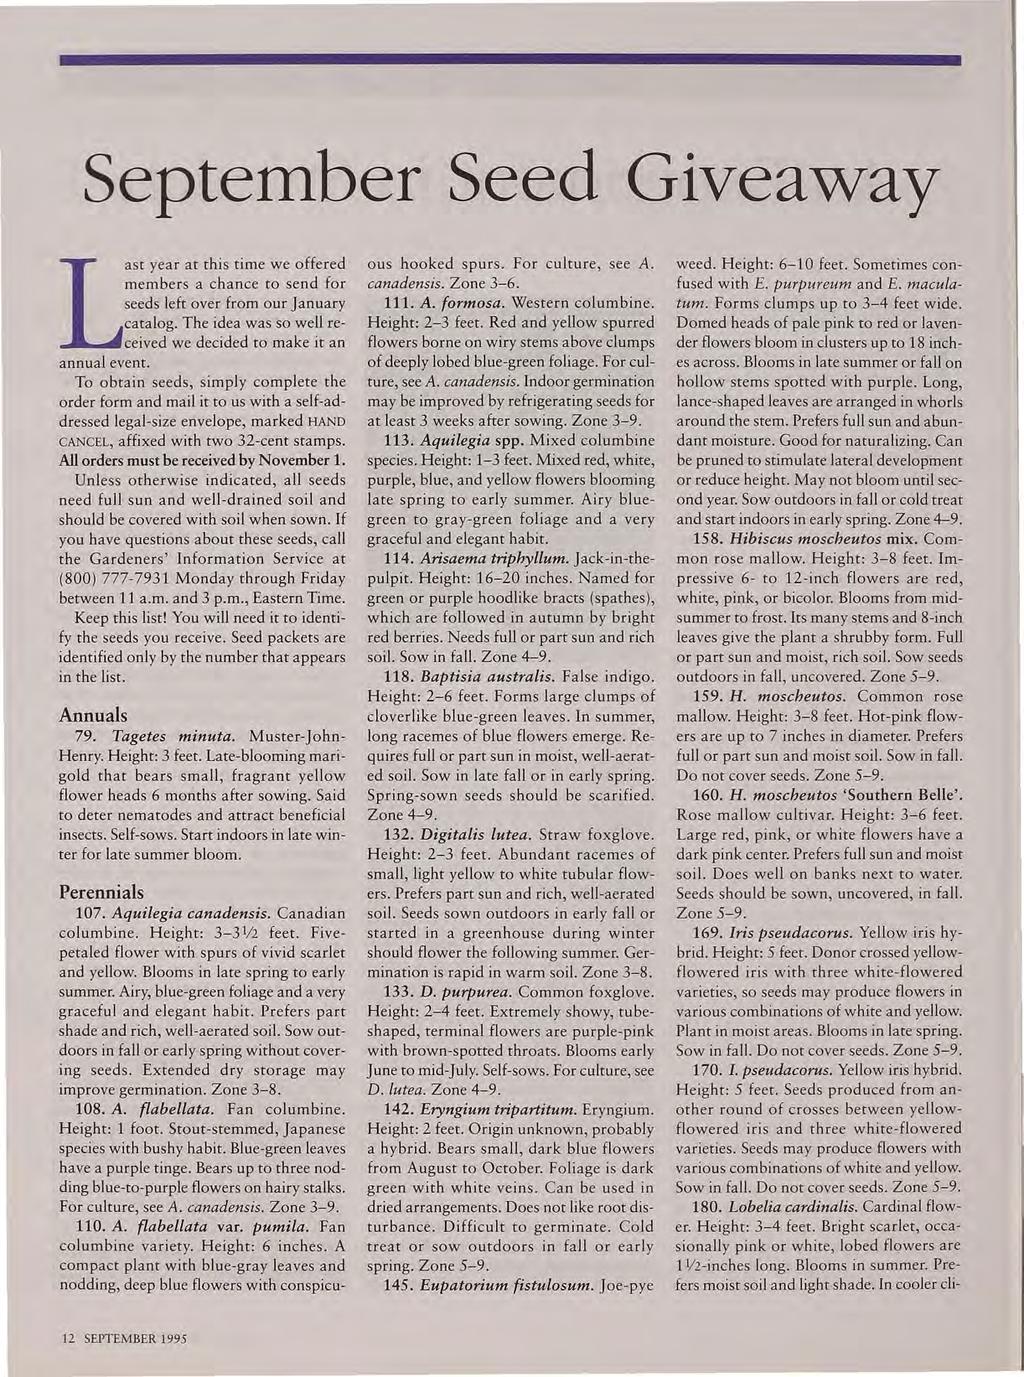 September Seed Giveaway Last year at this time we offered members a chance to send for seeds left over from our January catalog. The idea was so well received we decided to make it an annual event.